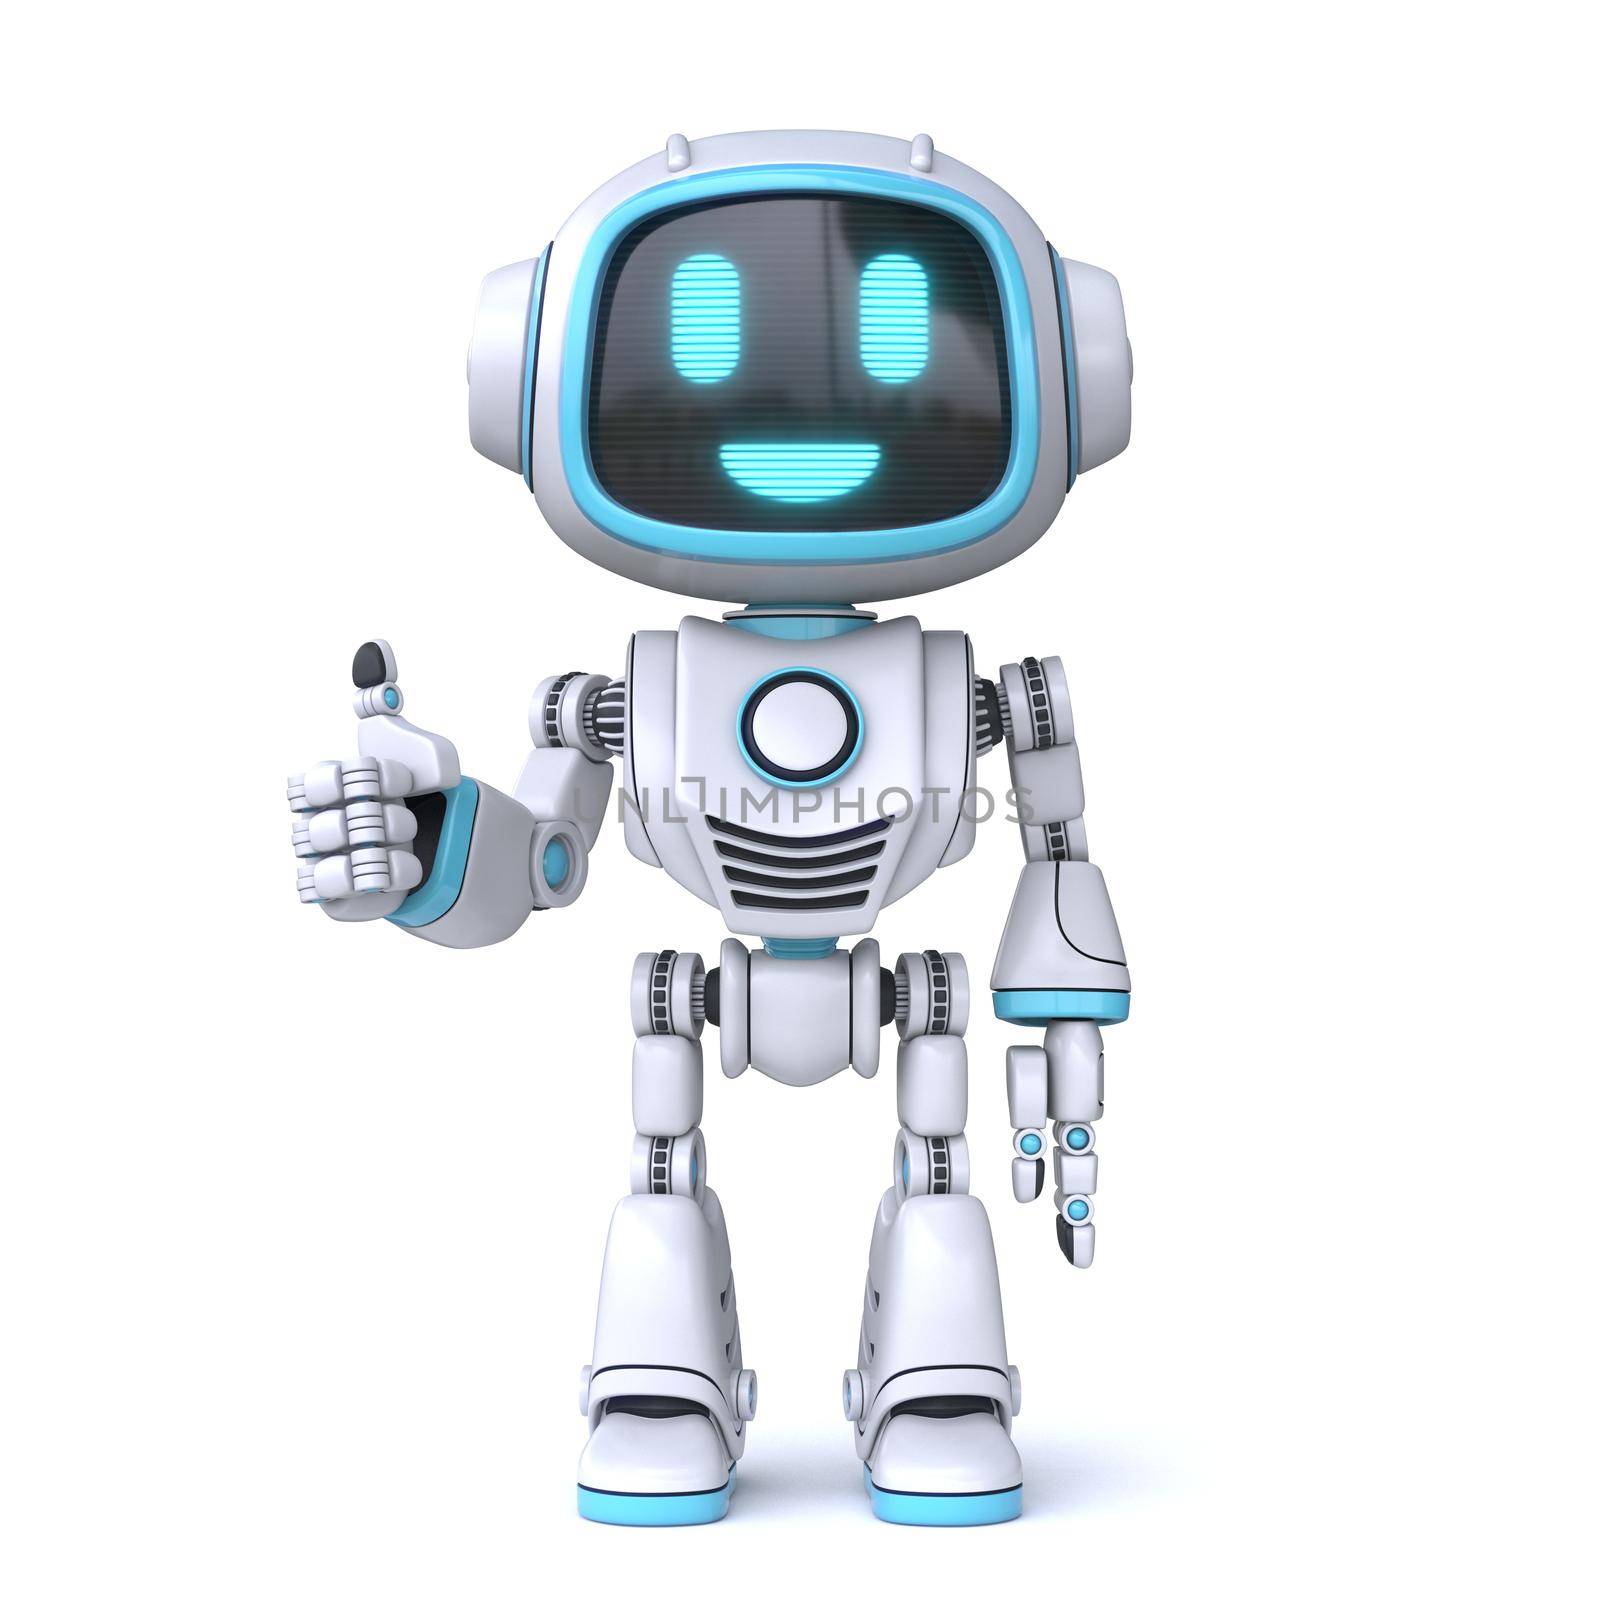 Cute blue robot giving thumbs up 3D rendering illustration isolated on white background